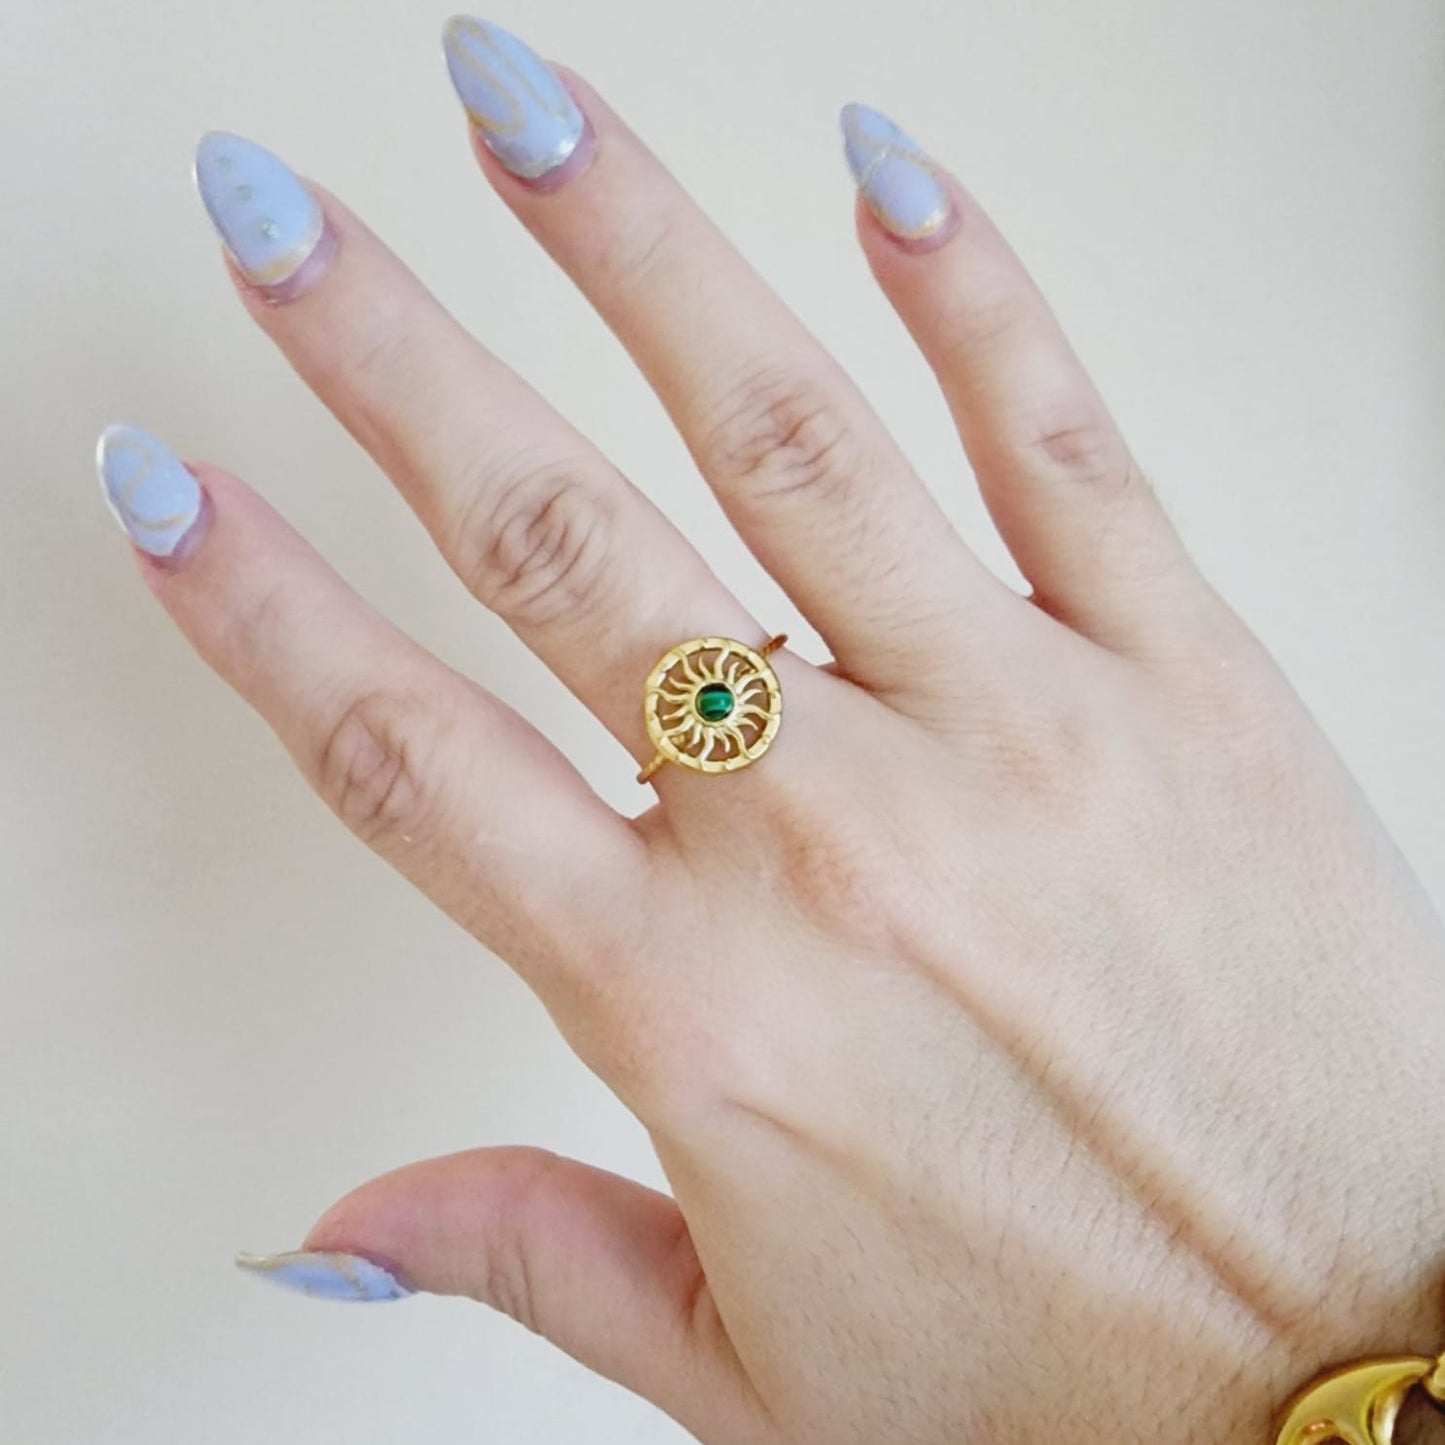 Emerald ring, Star ring, Adjustable bold ring, Adjustable Gold ring, Delicate and simple ring, chunky star ring, green gold ring, waterproof ring, hypoallergenic ring, untarnish ring, anti tarnish ring, anillo de estrellas, Water Resistant Jewelry, sun ring, sunshine ring, green Stone sun ring, sun green adjustable ring